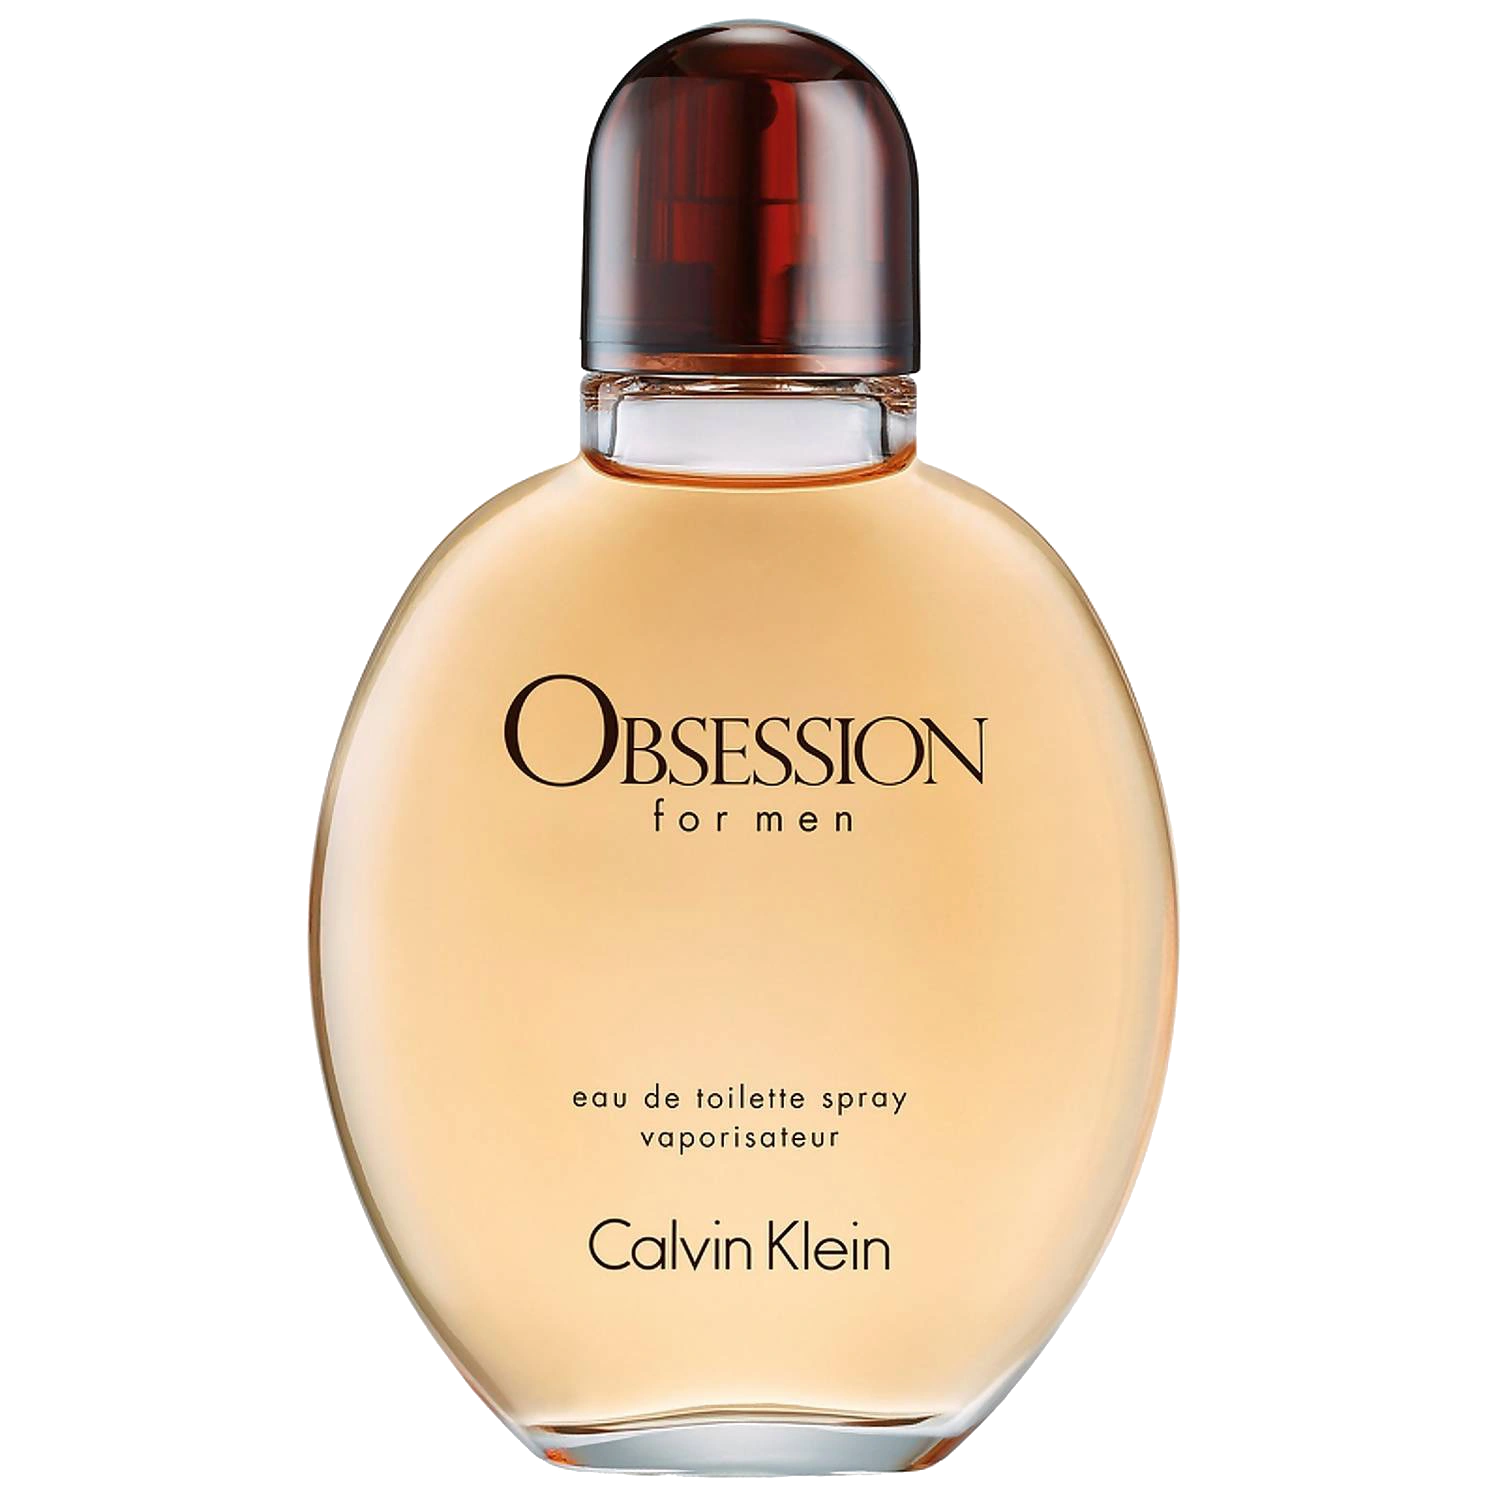 A close-up view of the Calvin Klein Obsession for Men perfume bottle against a minimalist background.